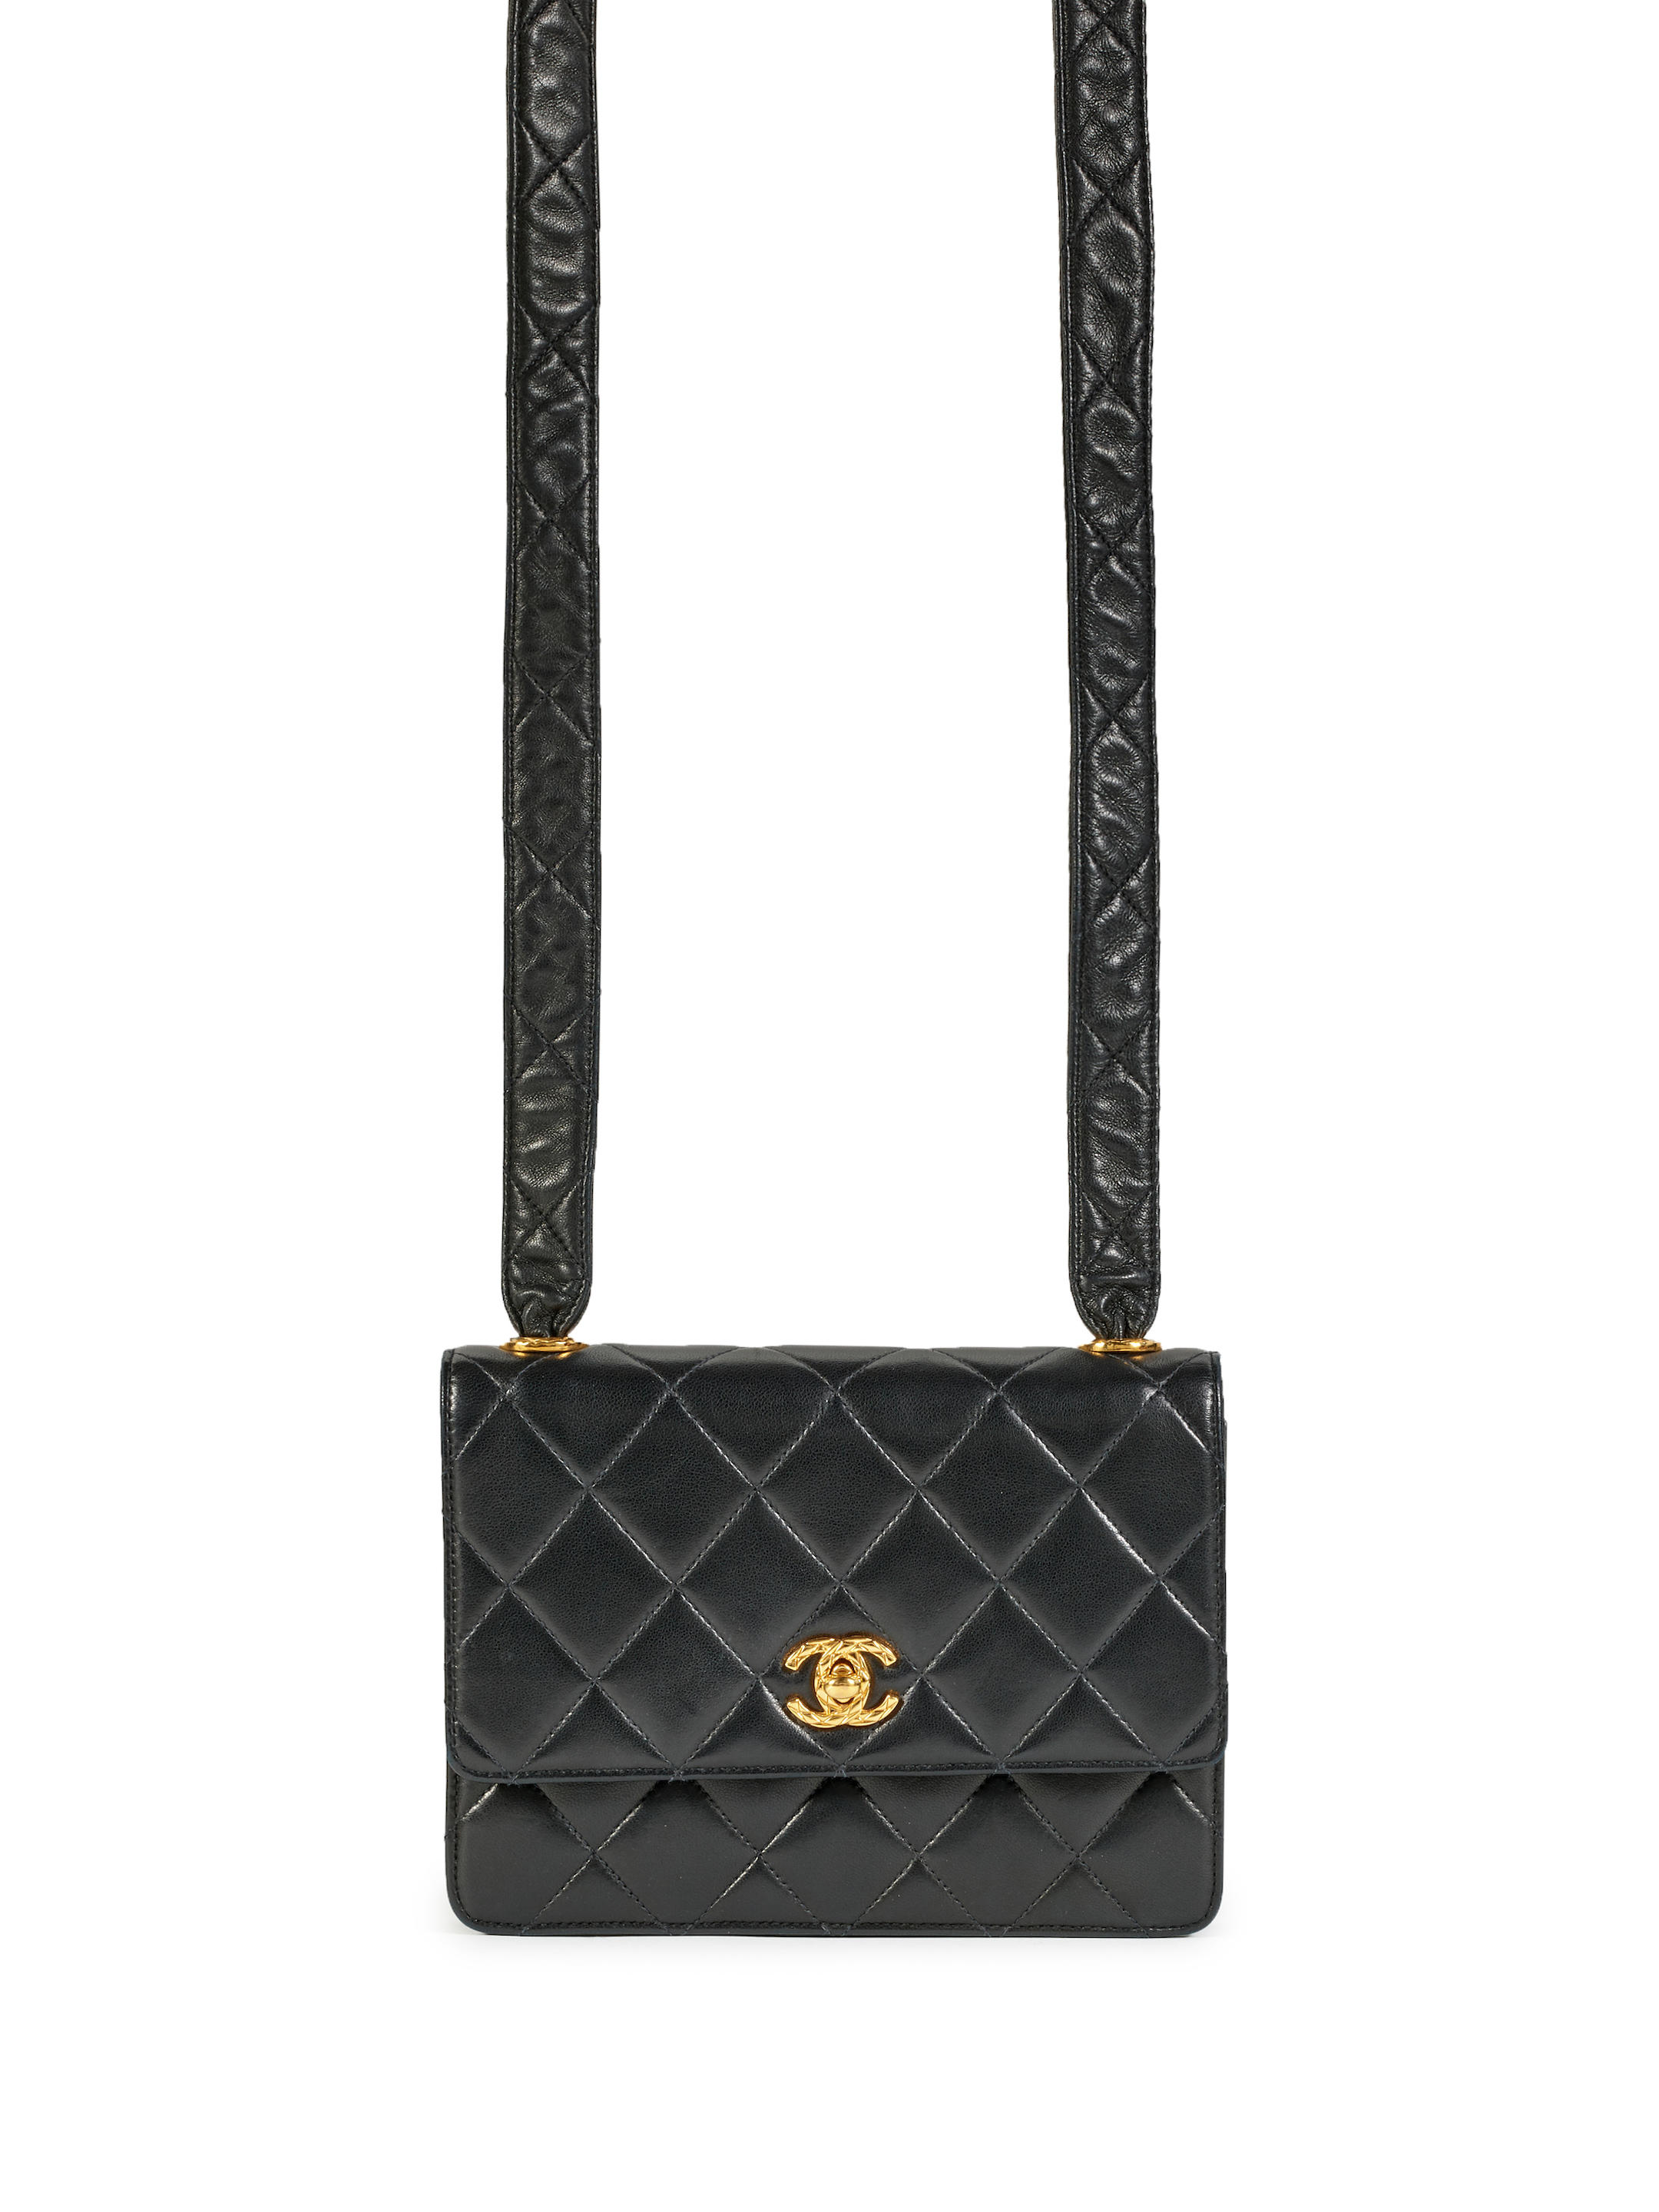 CHANEL TOTE BAG, brown leather with chevron and square quilted